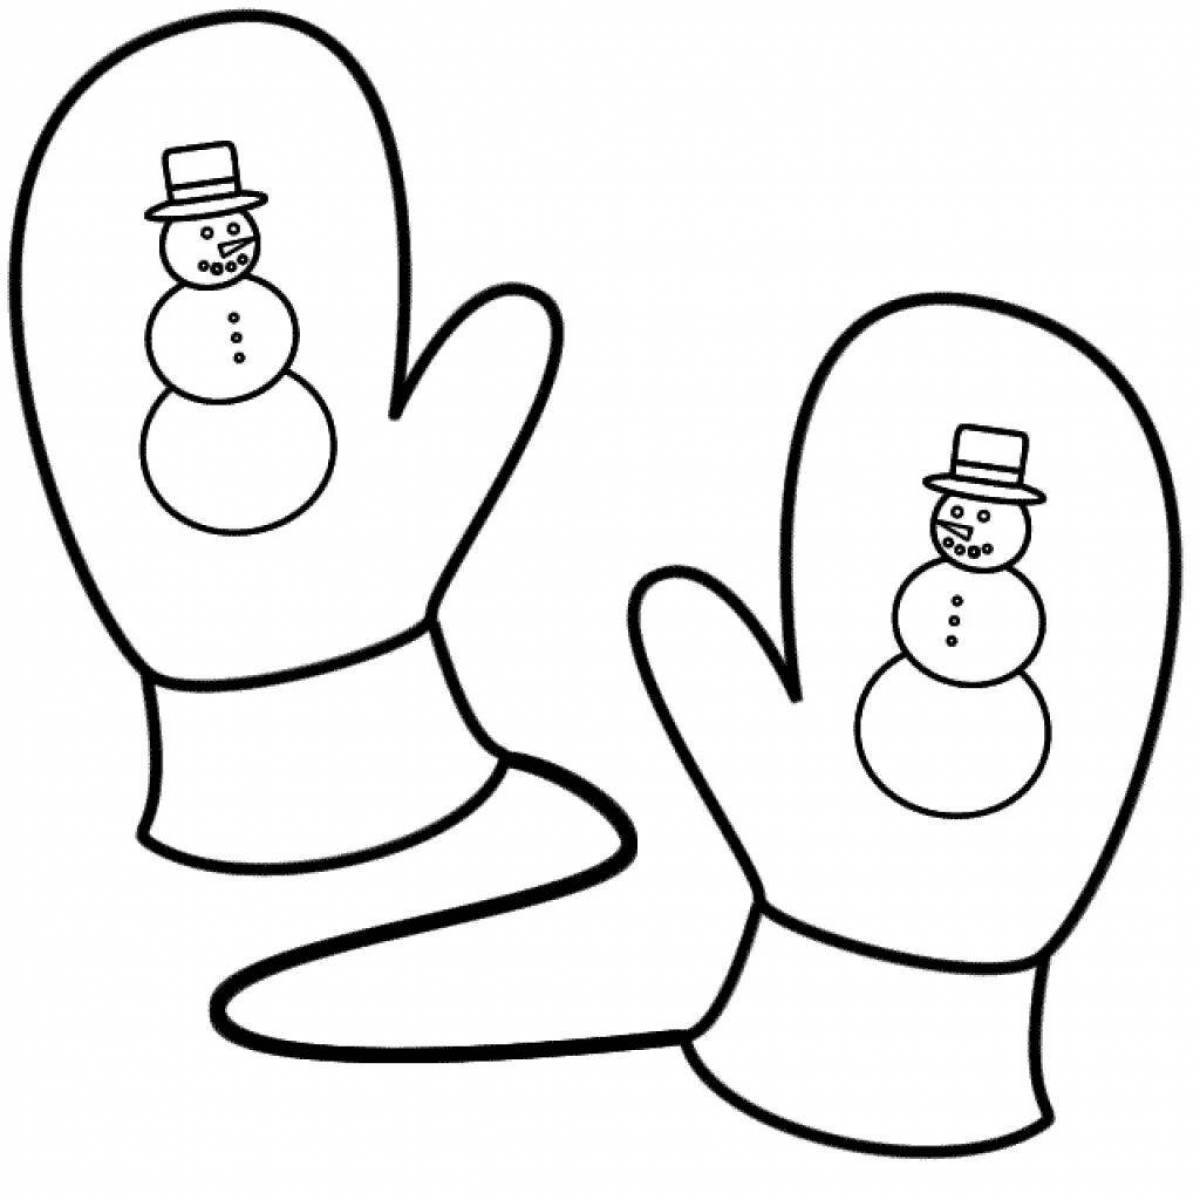 Exciting coloring santa mitten for babies